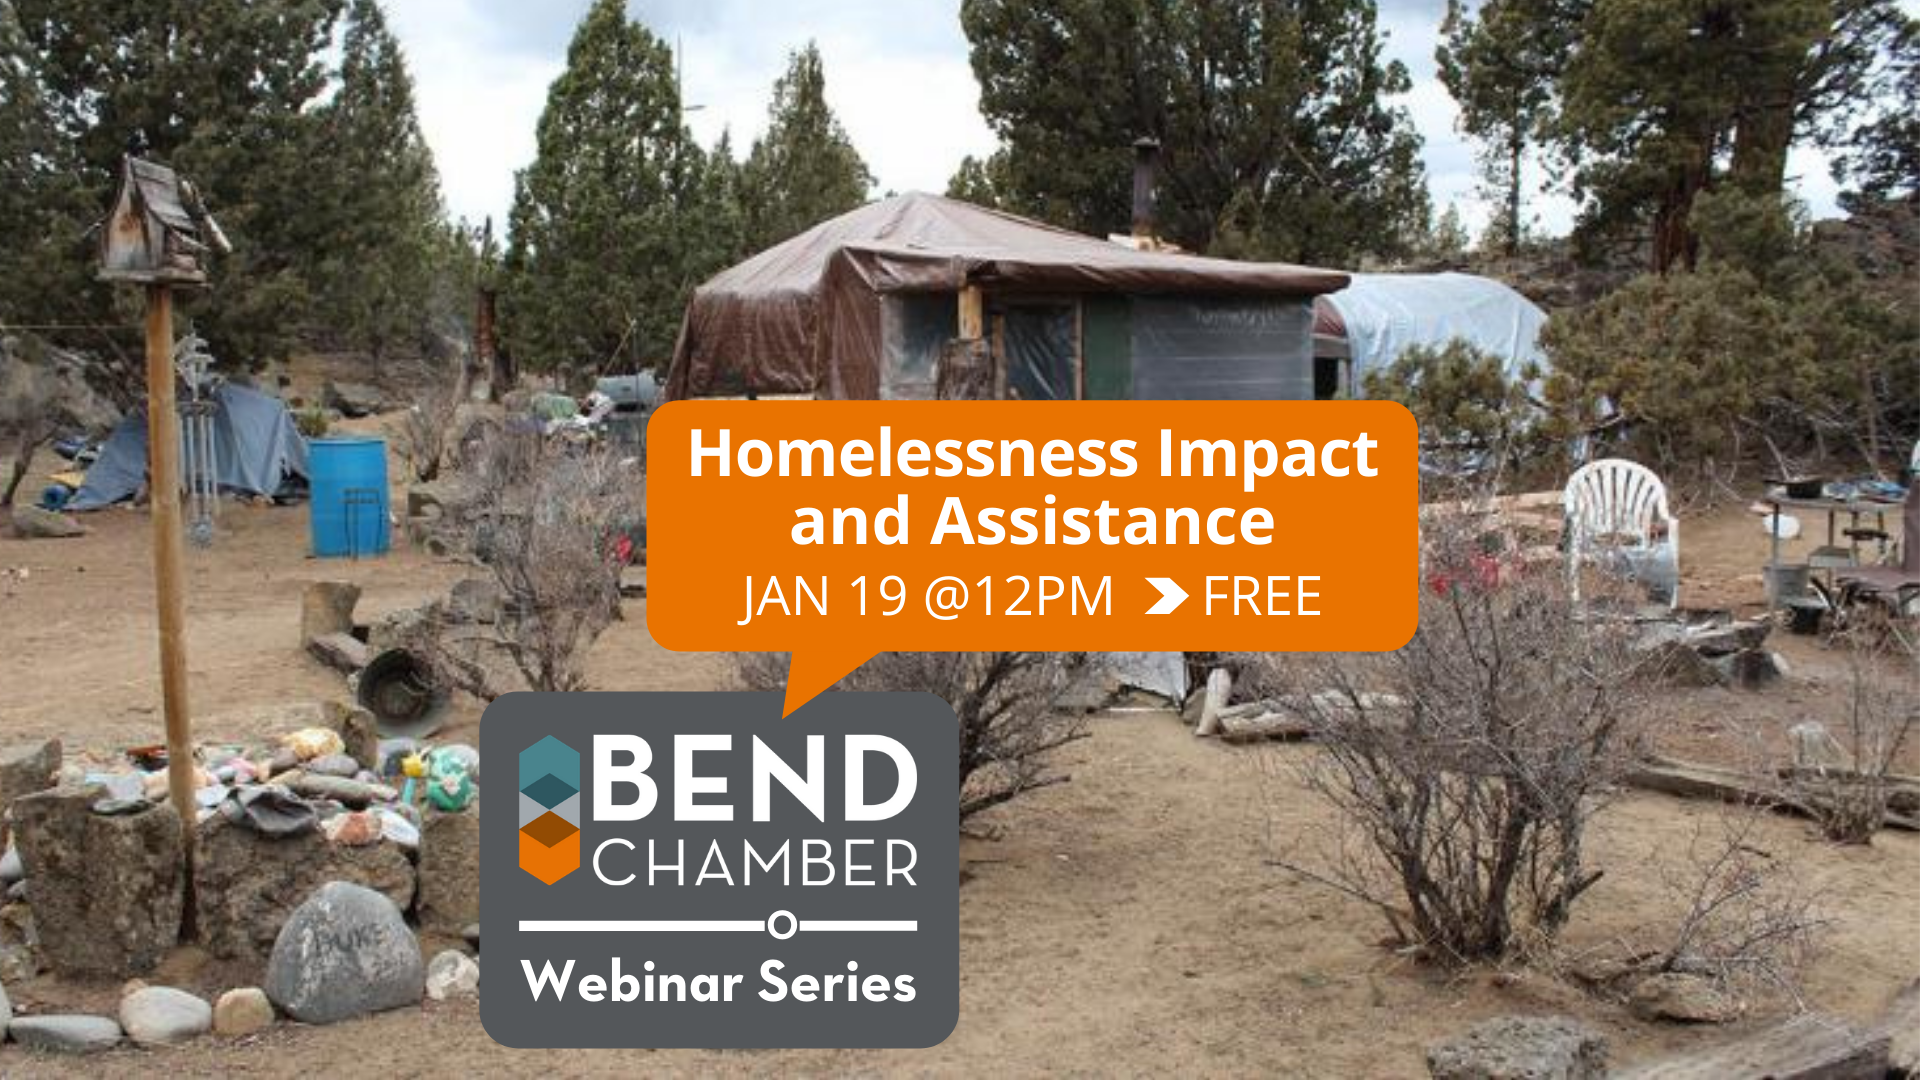 Homelessness Impact and Assistance